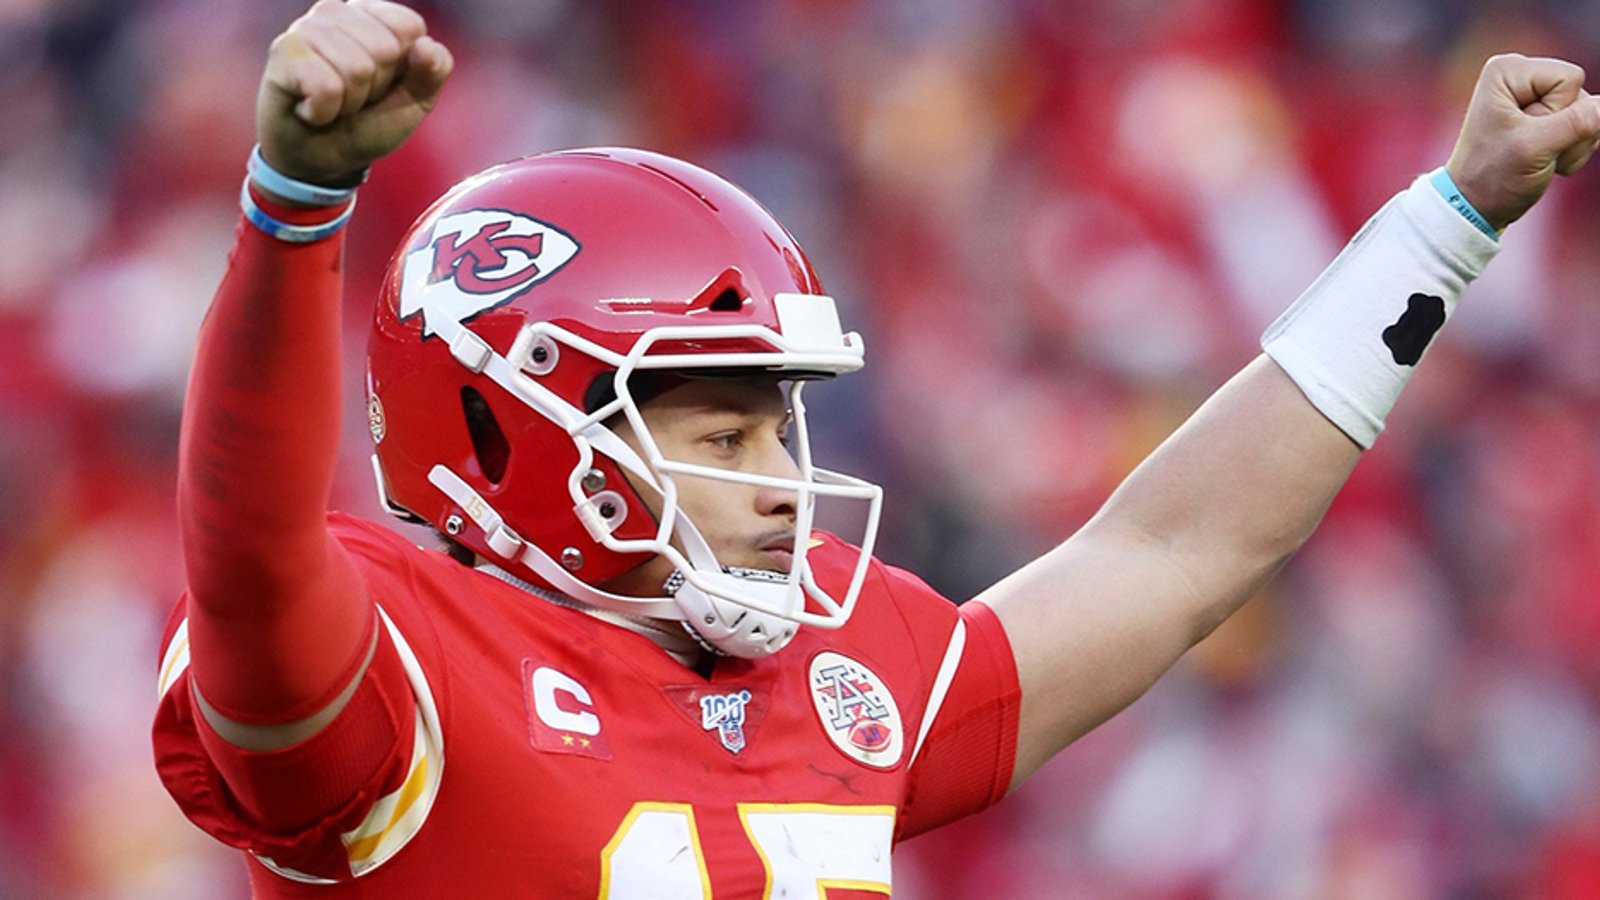 WATCH: Chiefs advance to 4th straight AFC title game with thrilling OT win! 